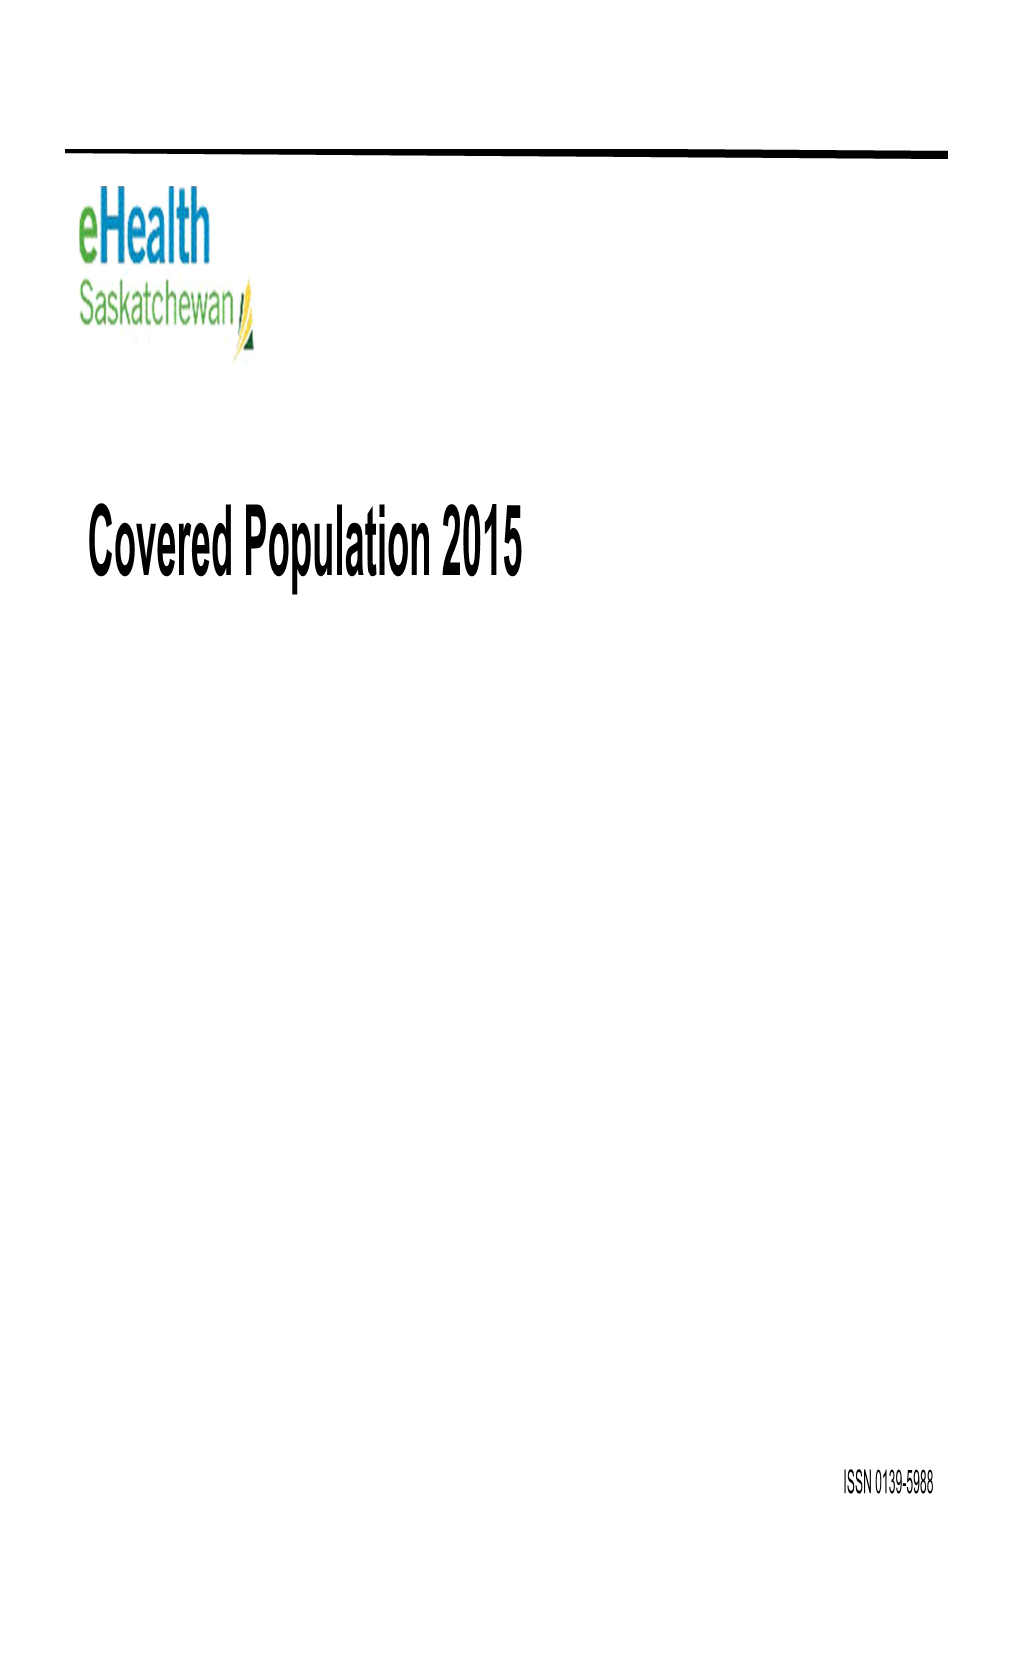 Covered Population 2015